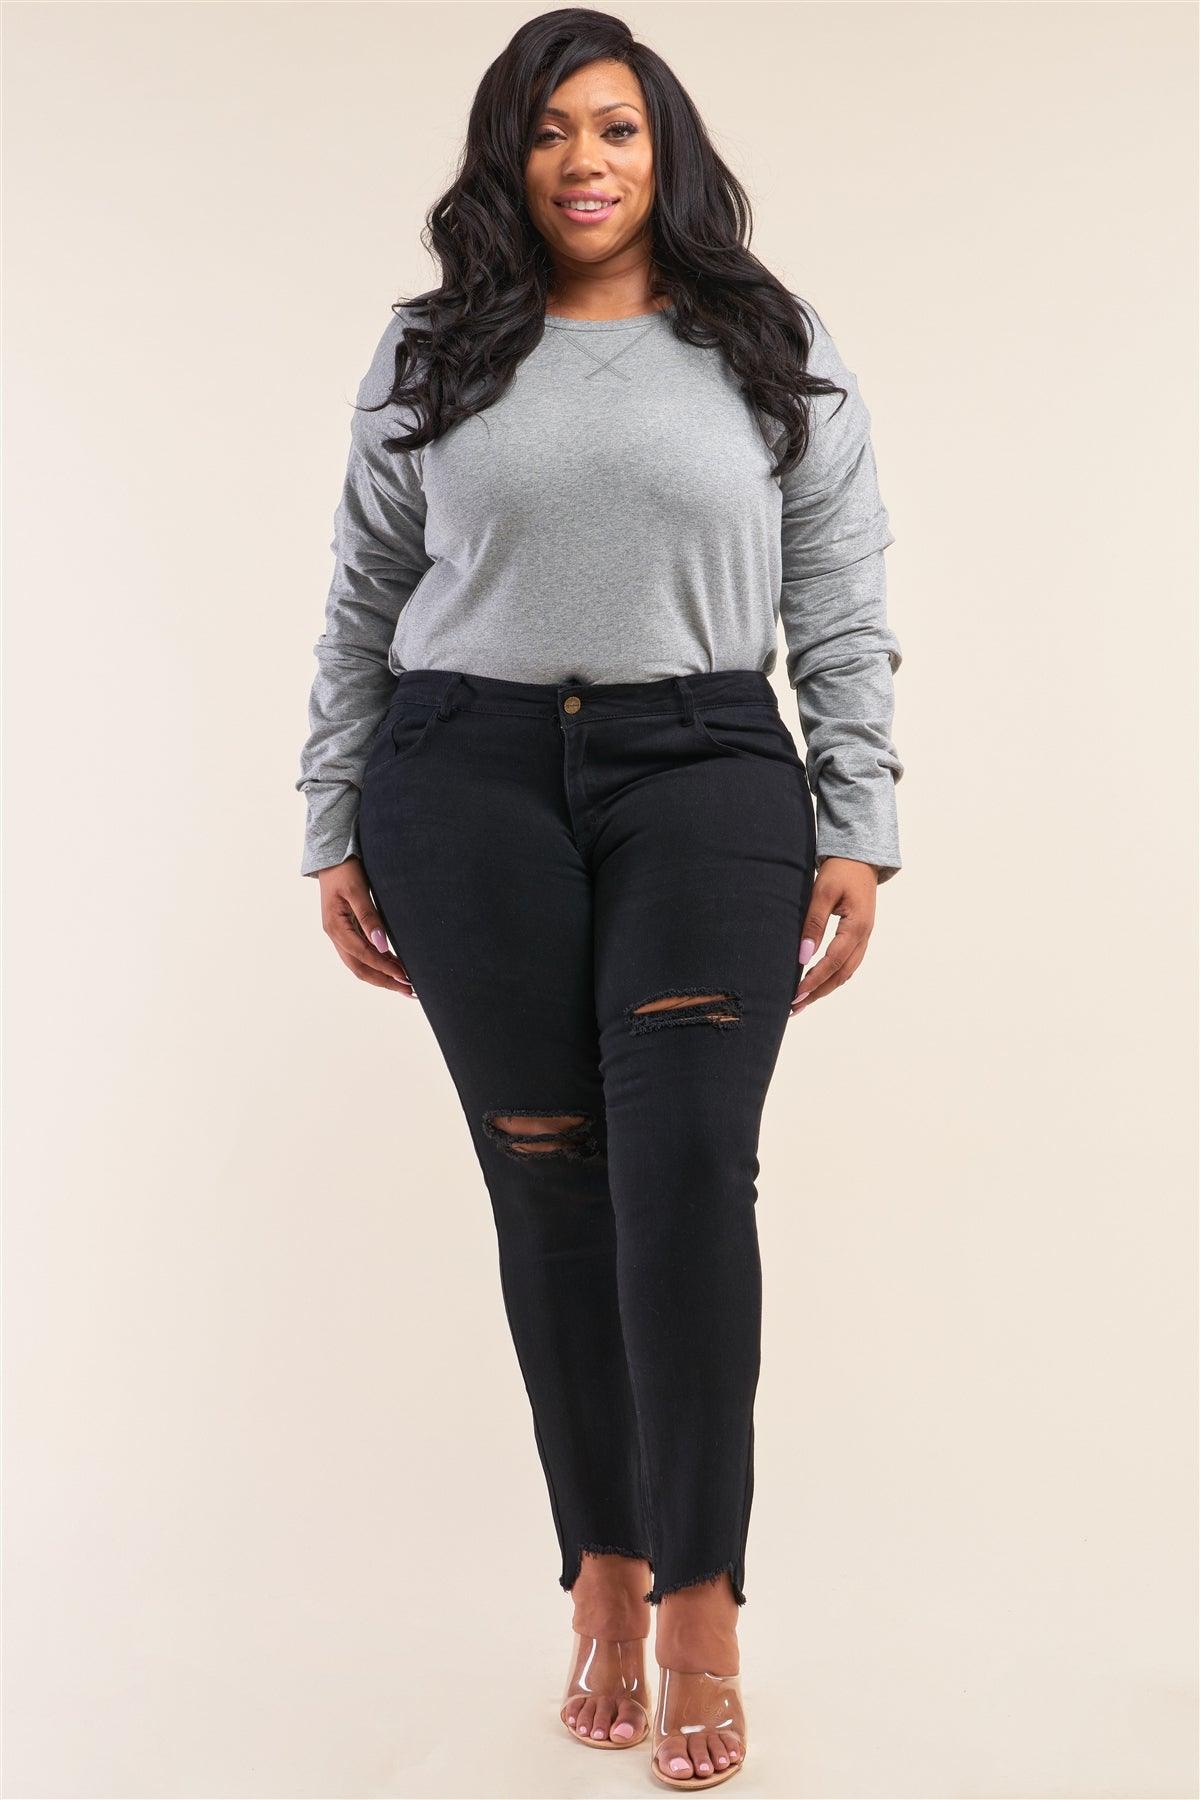 Plus Size Solid Black Low-Mid Rise Tight Fit Ripped Denim Jeans